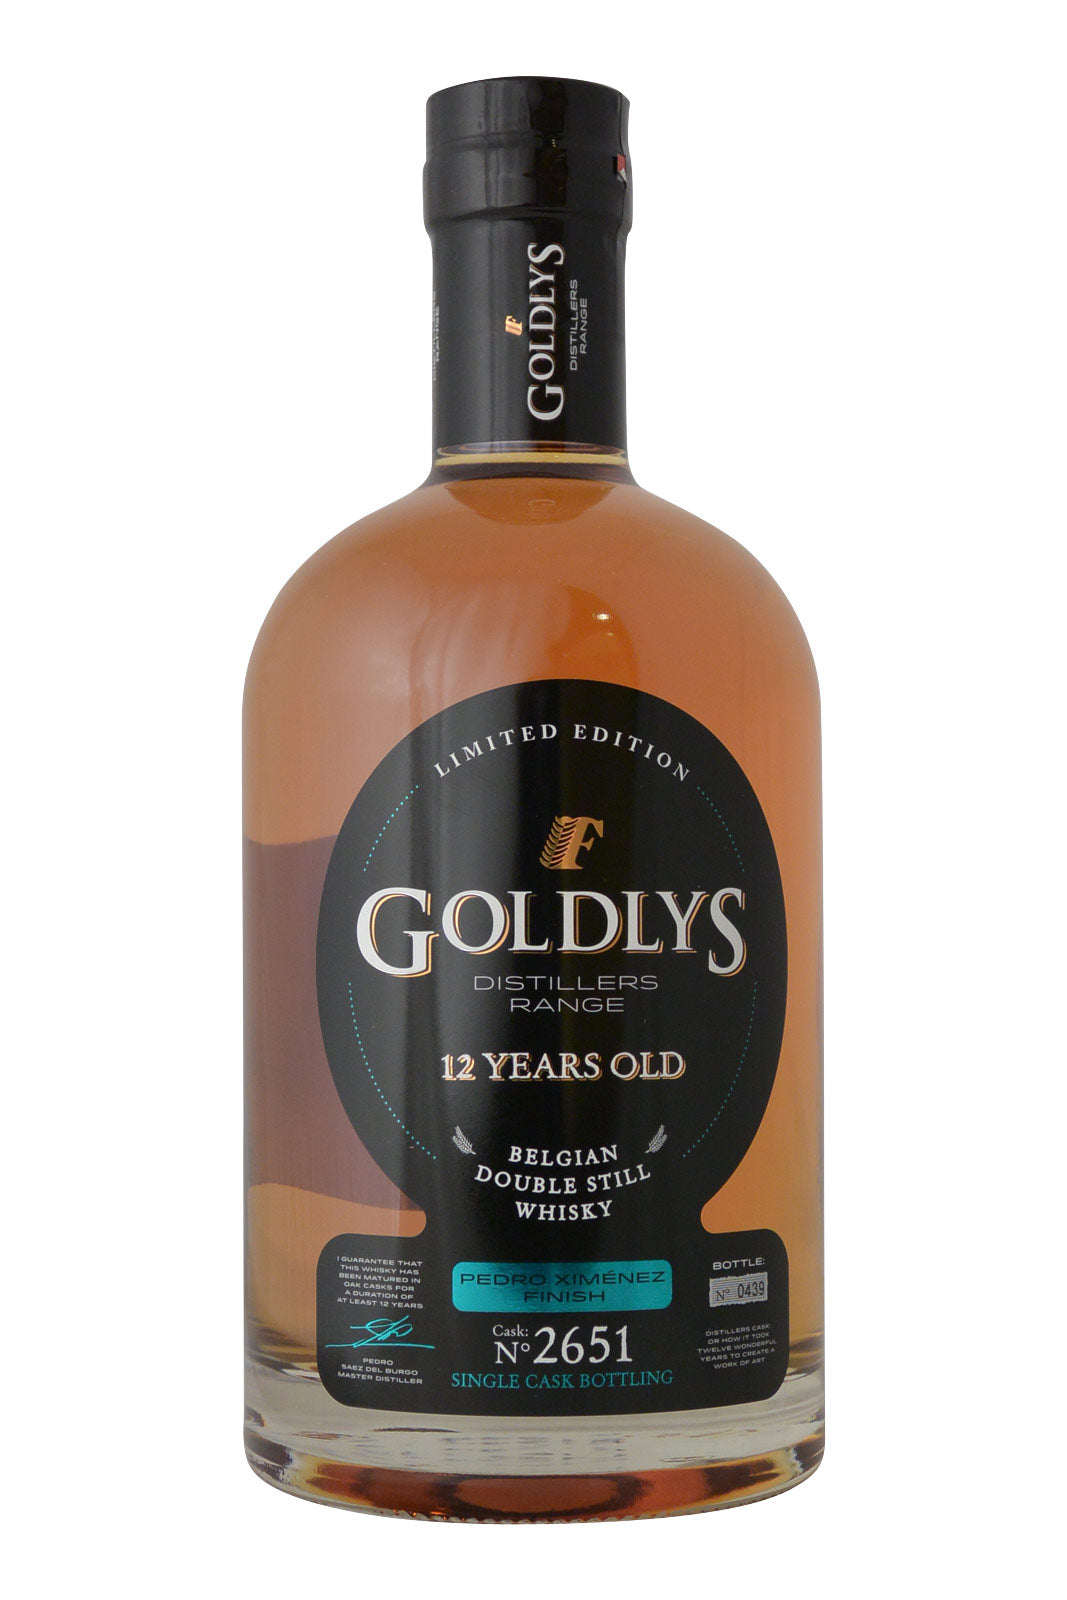 Goldlys 12 Year Old Double Still Cask N°2651